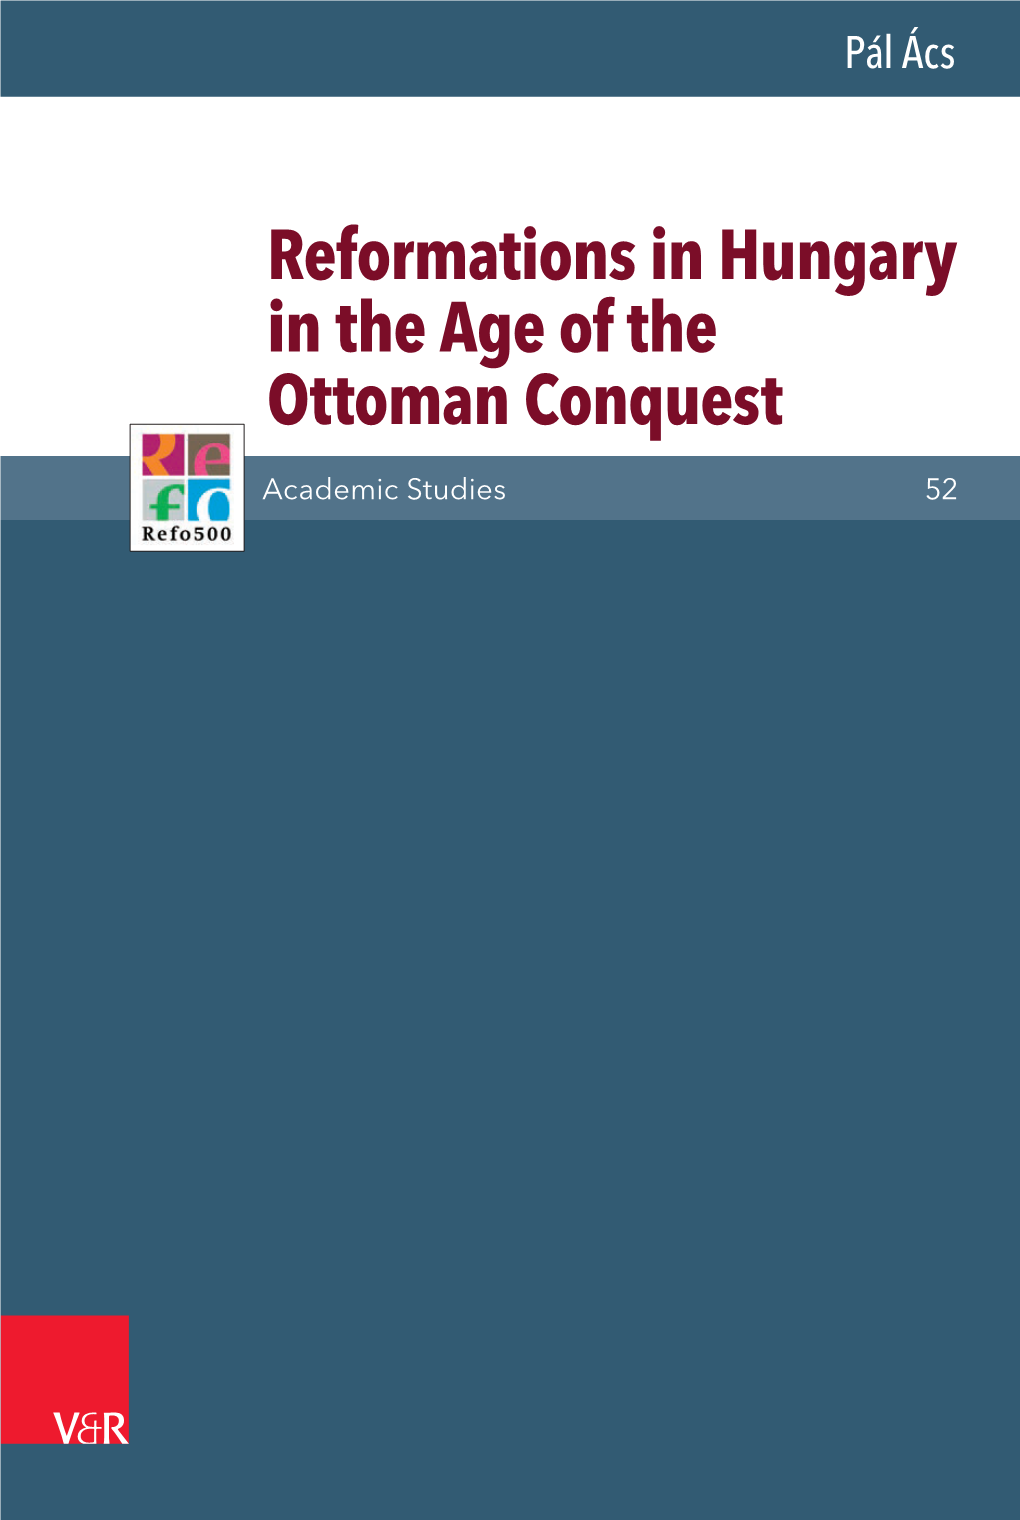 Reformations in Hungary in the Age of the Ottoman Conquest